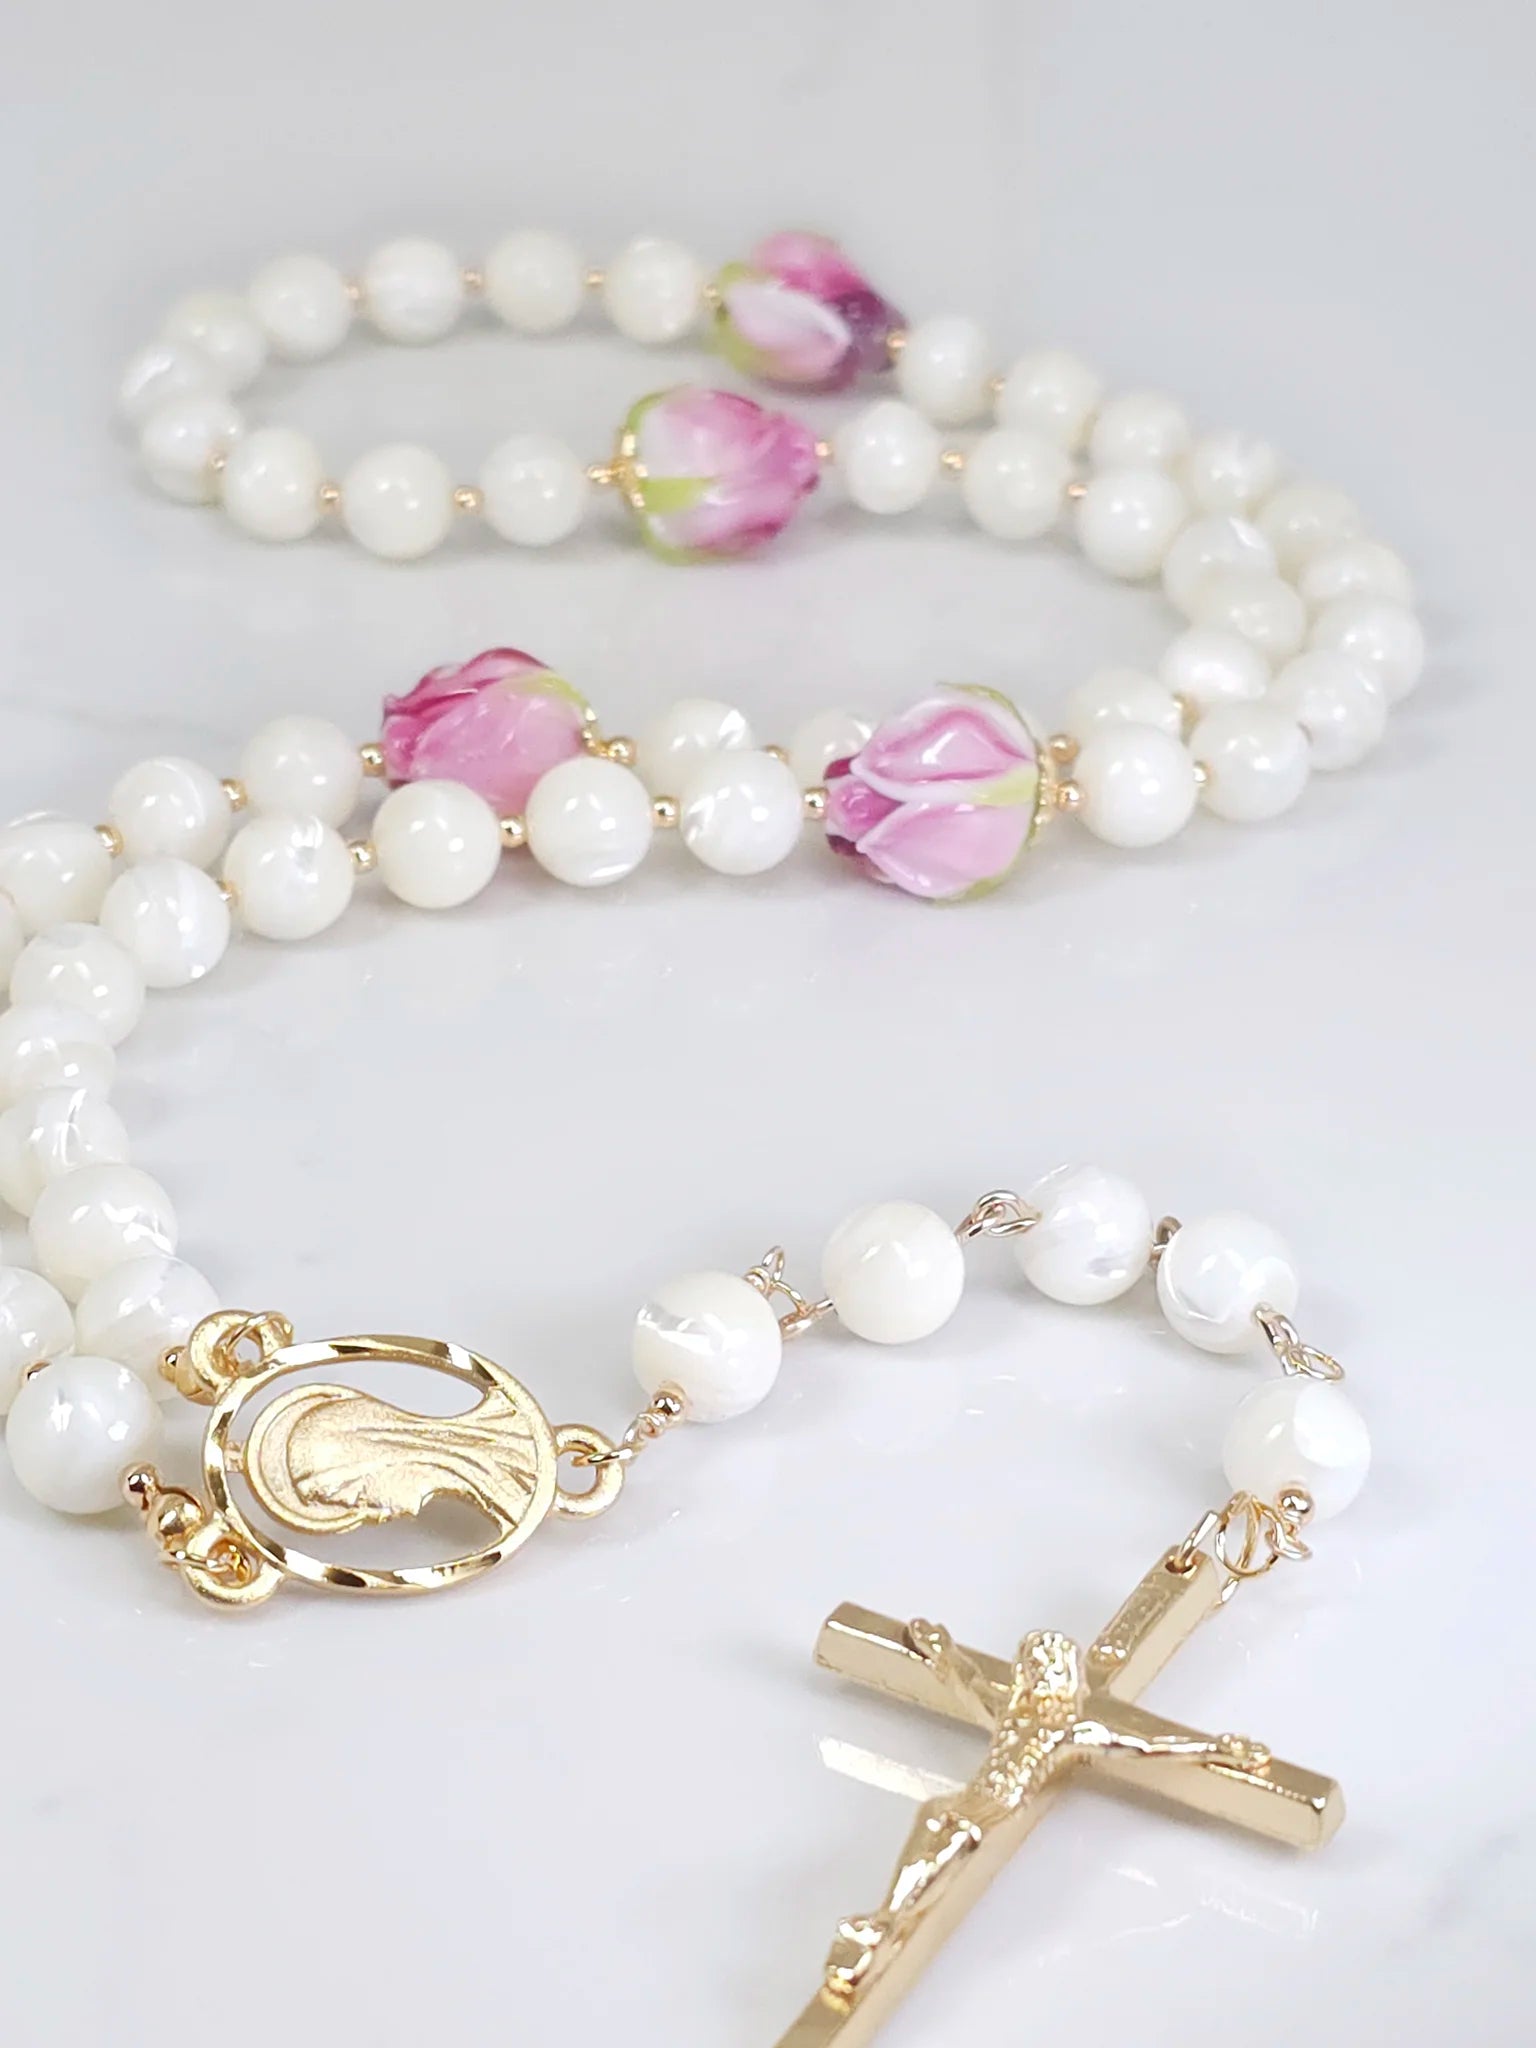 The most elegant rosary in the world.